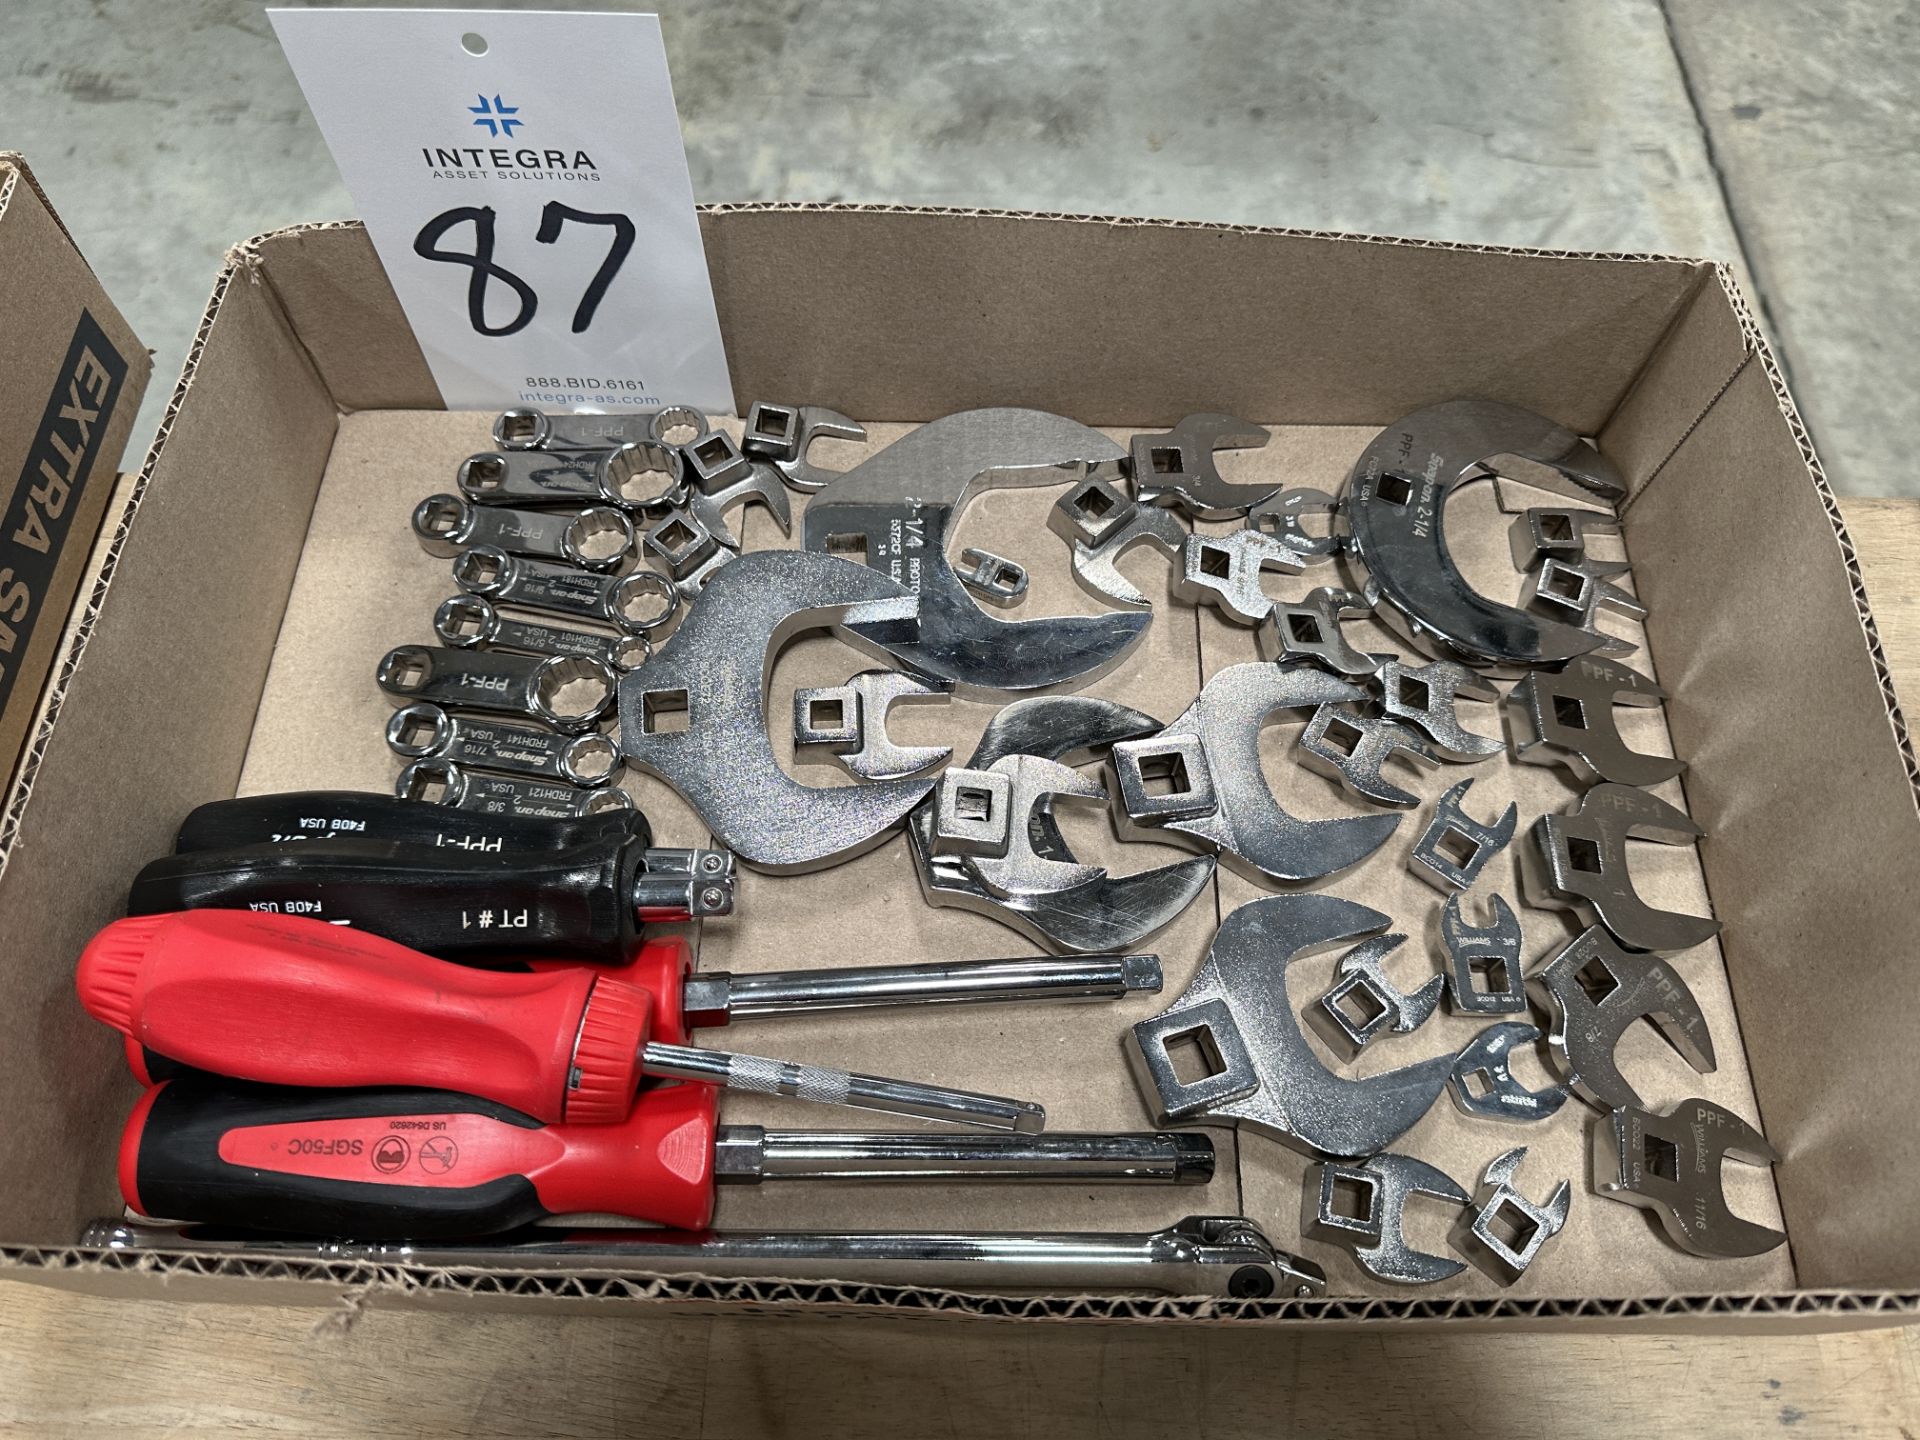 Lot of Assorted Ratchet Wrench Attachments w/ Drivers